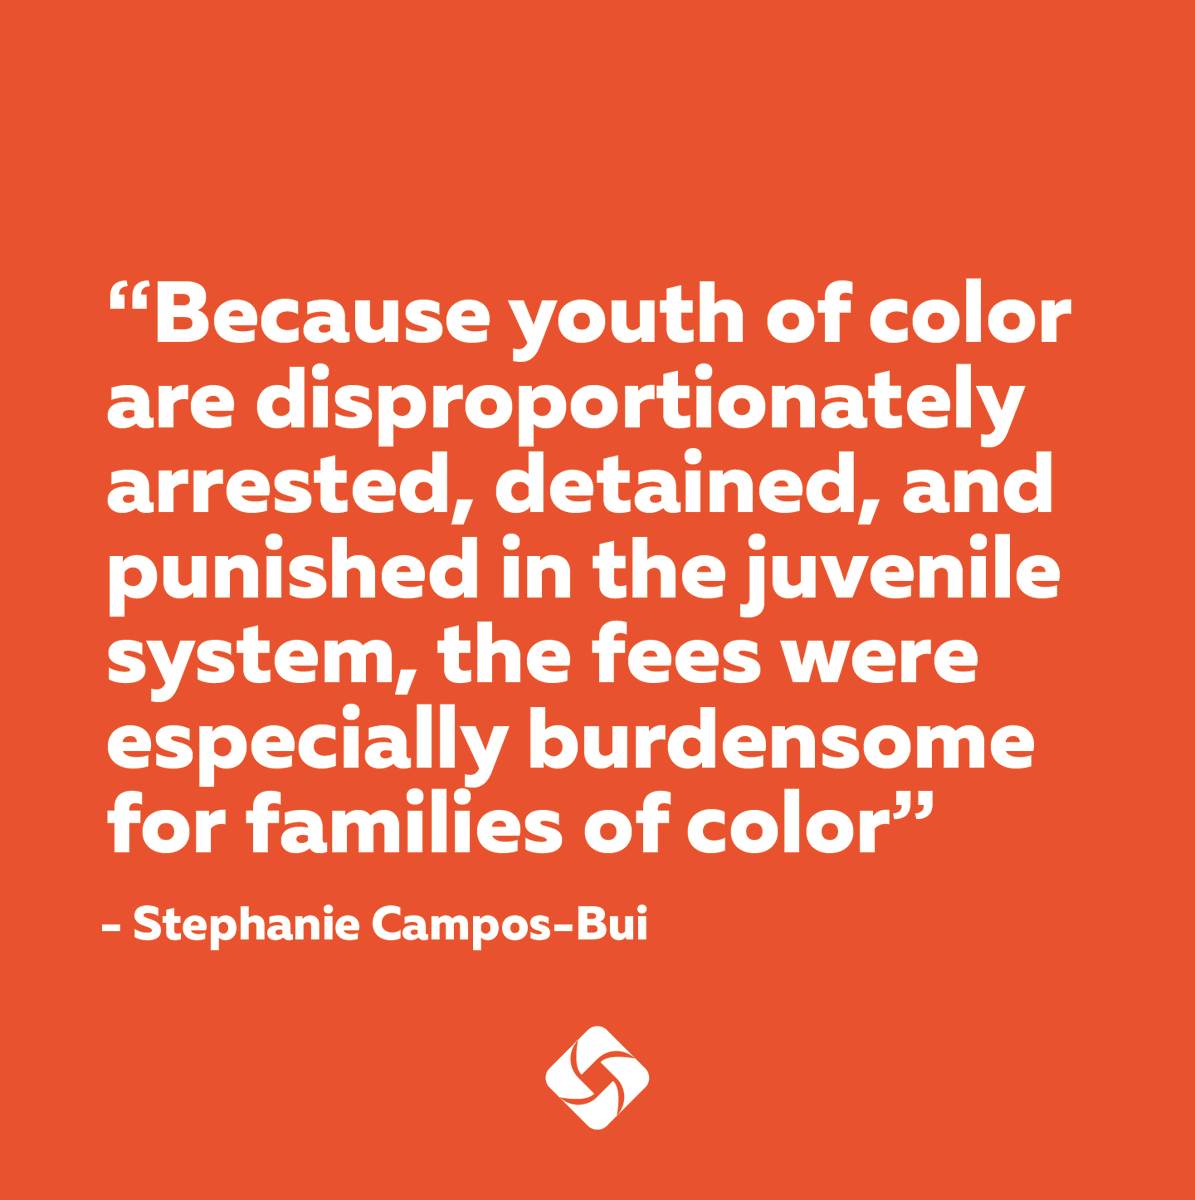 Not only is it seen in statistics, but we have on the grounds testimony of the unfair and unjust burden that families of color shoulder a heavier financial burden for those who are court involved.